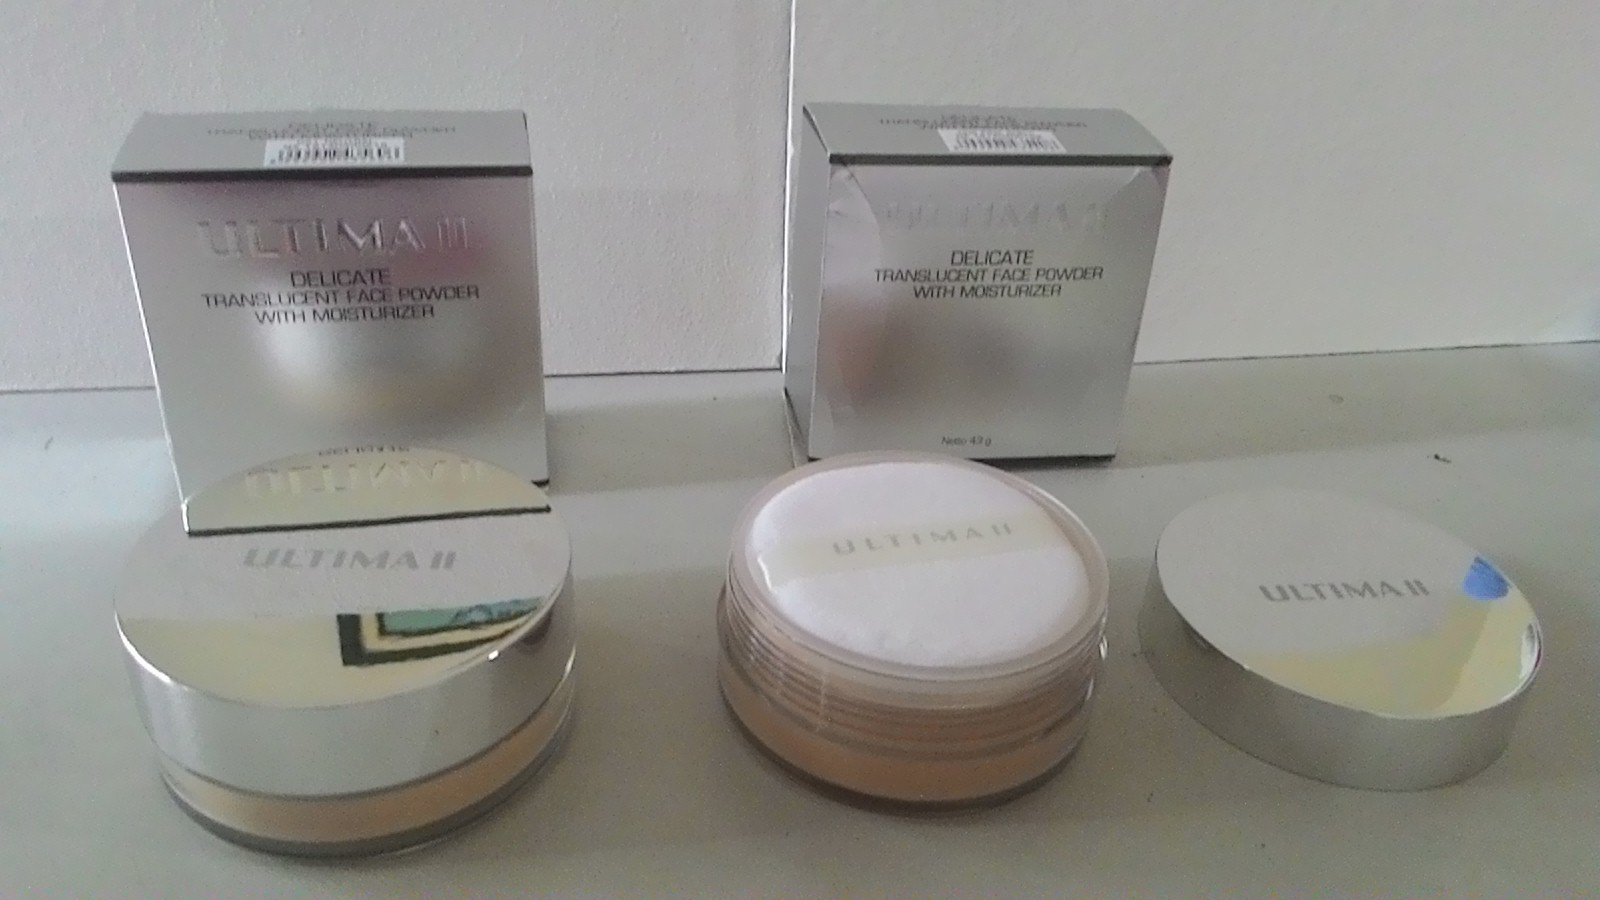 [Review] ULTIMA II Delicate Creme Powder Makeup and 